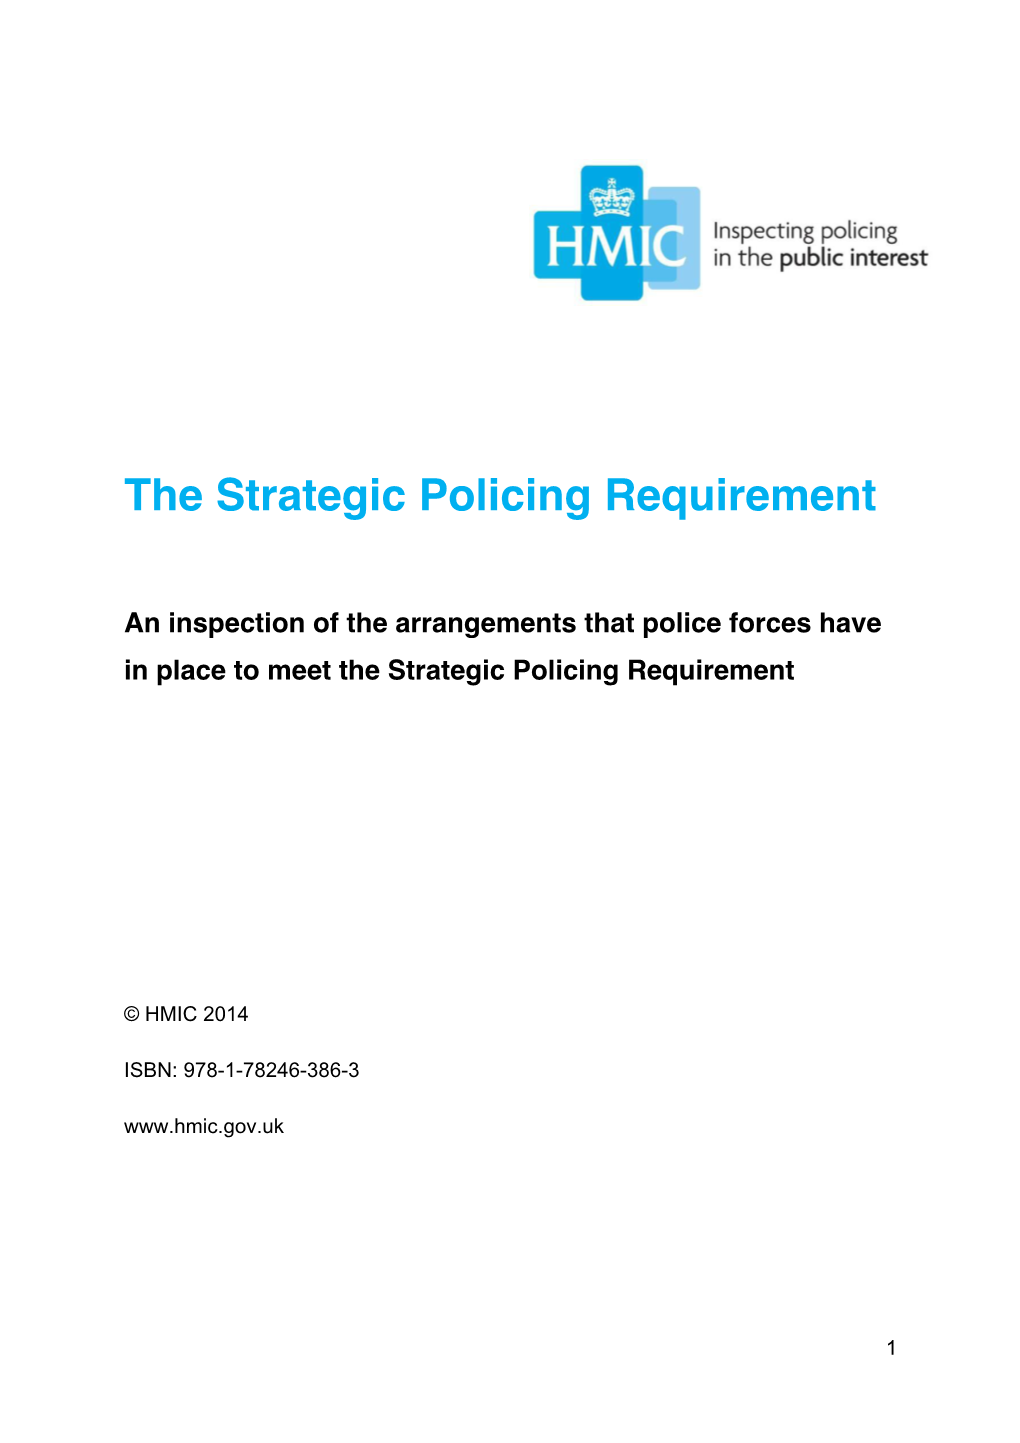 The Strategic Policing Requirement